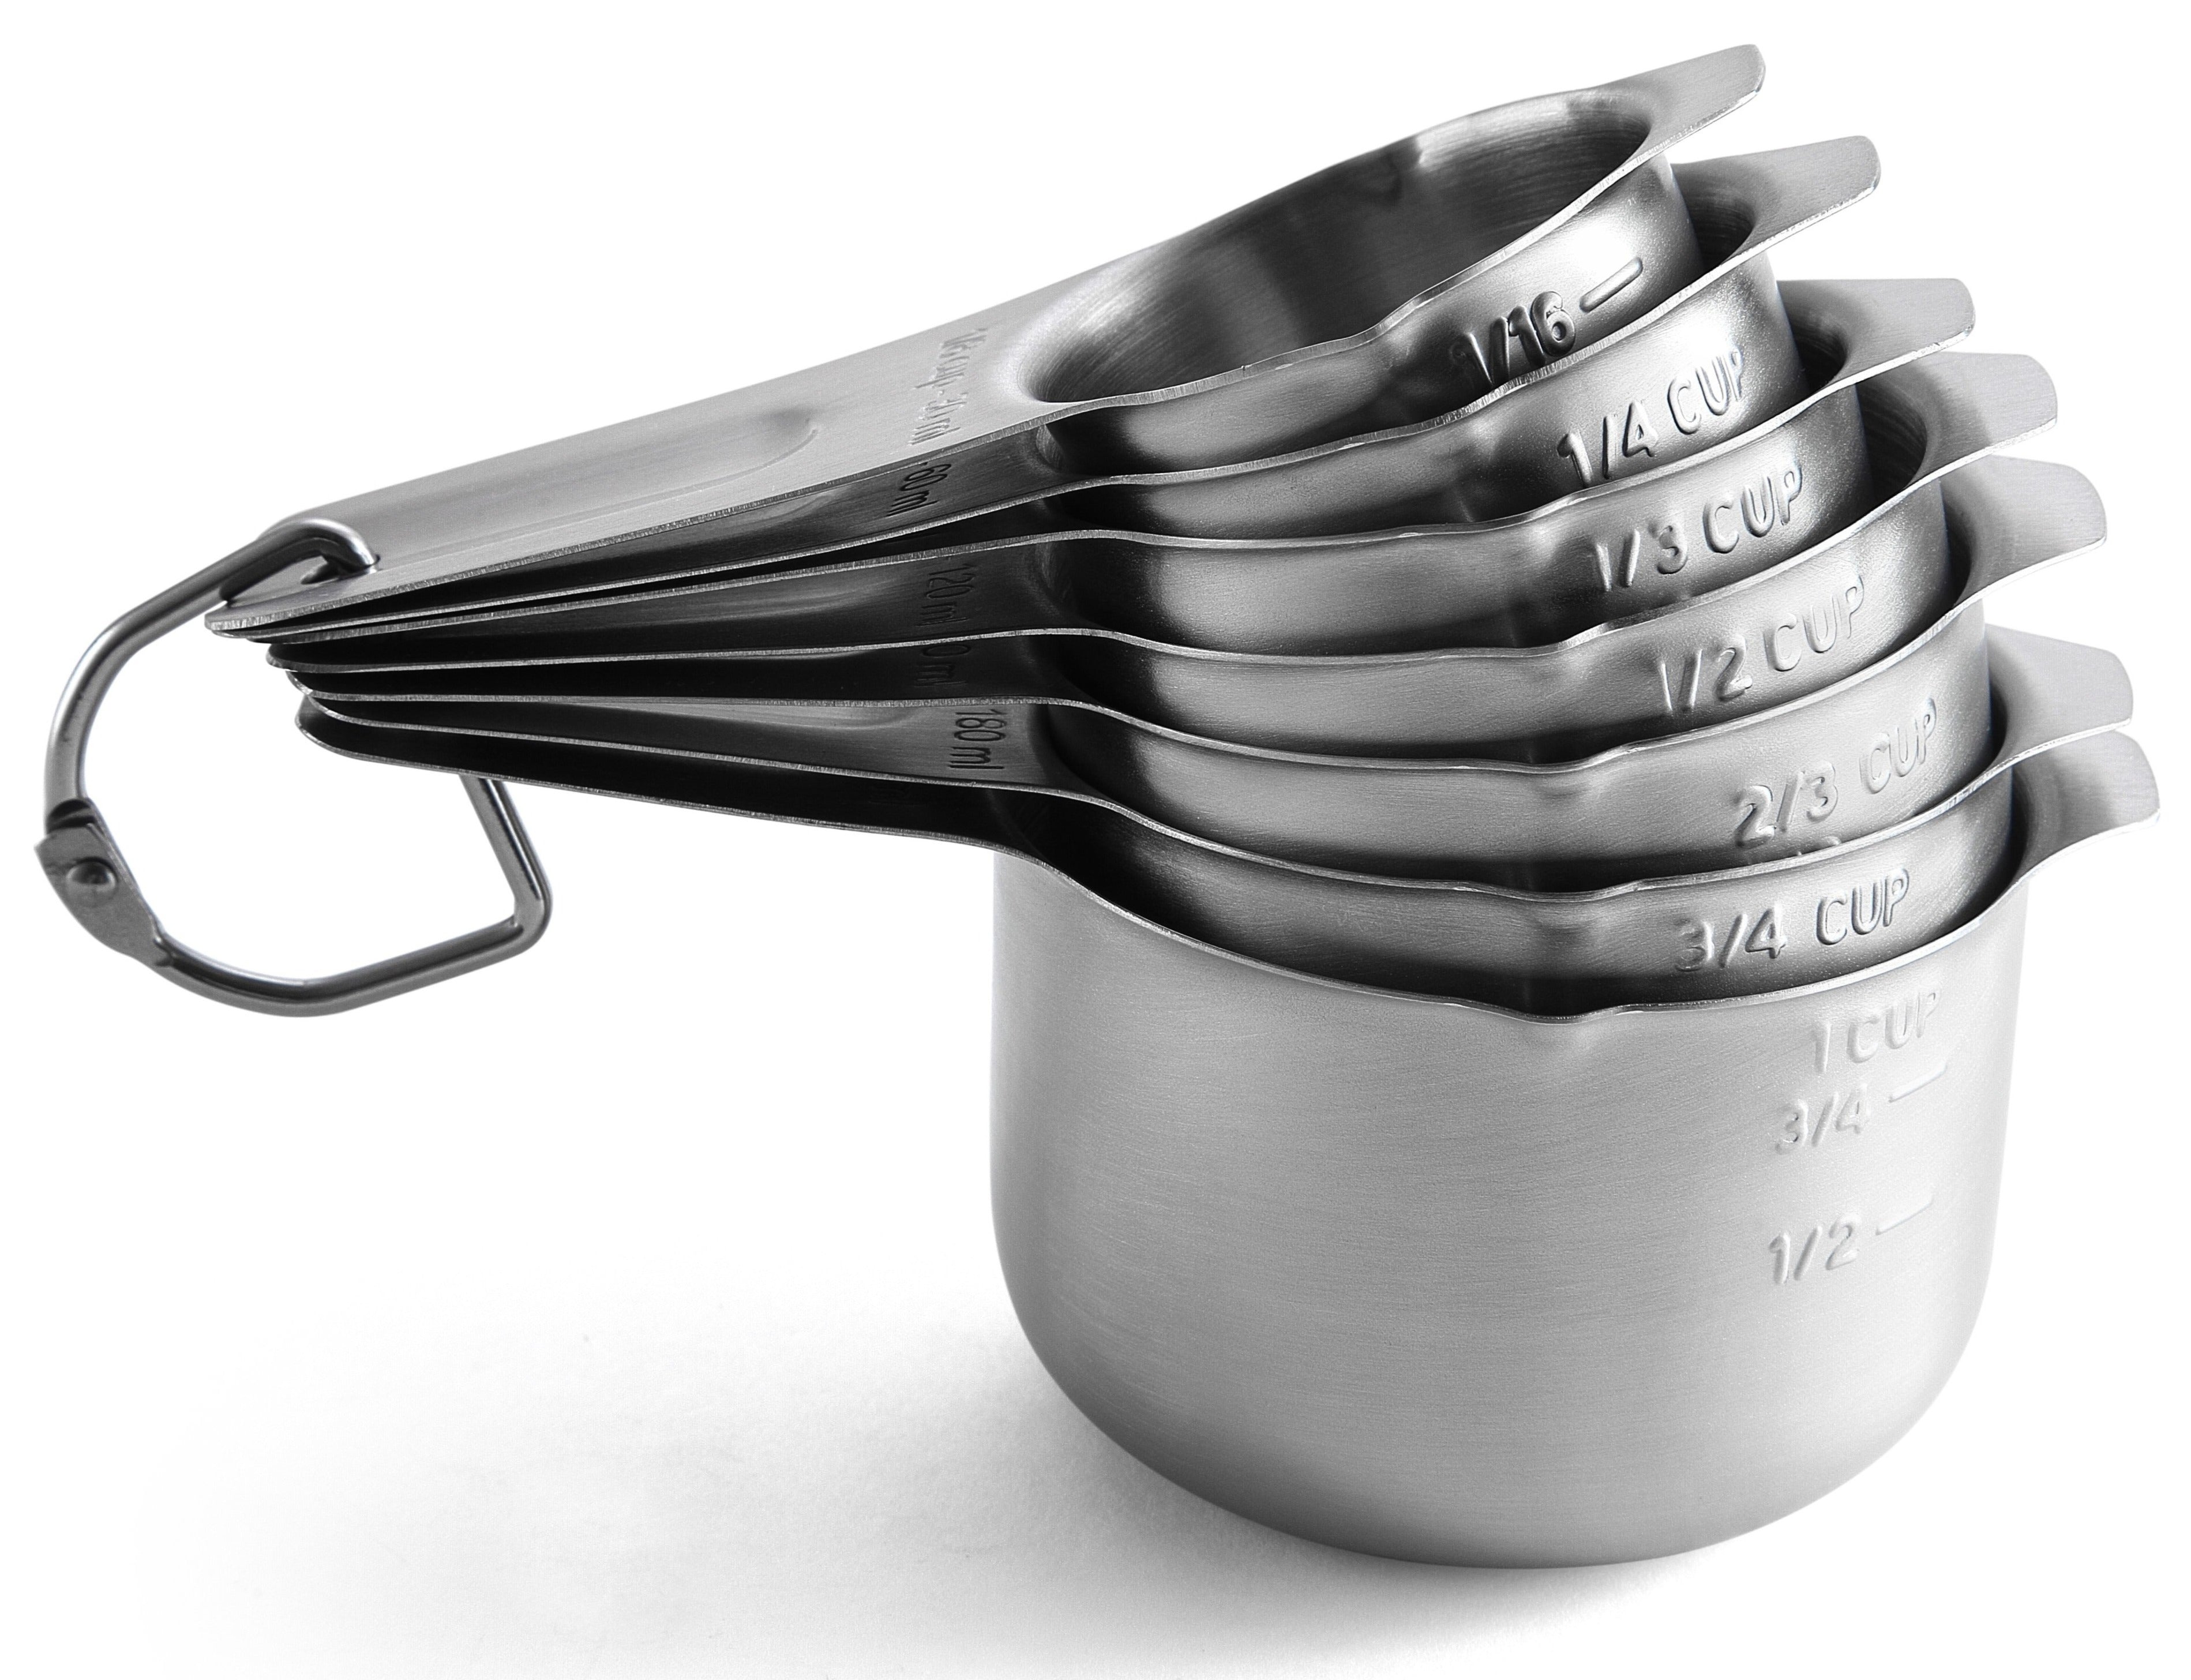 Magnetic Measuring Cups Set of 7 Stainless Steel Heavy Duty Measuring Cups  for Dry & Liquid Ingredients (color)